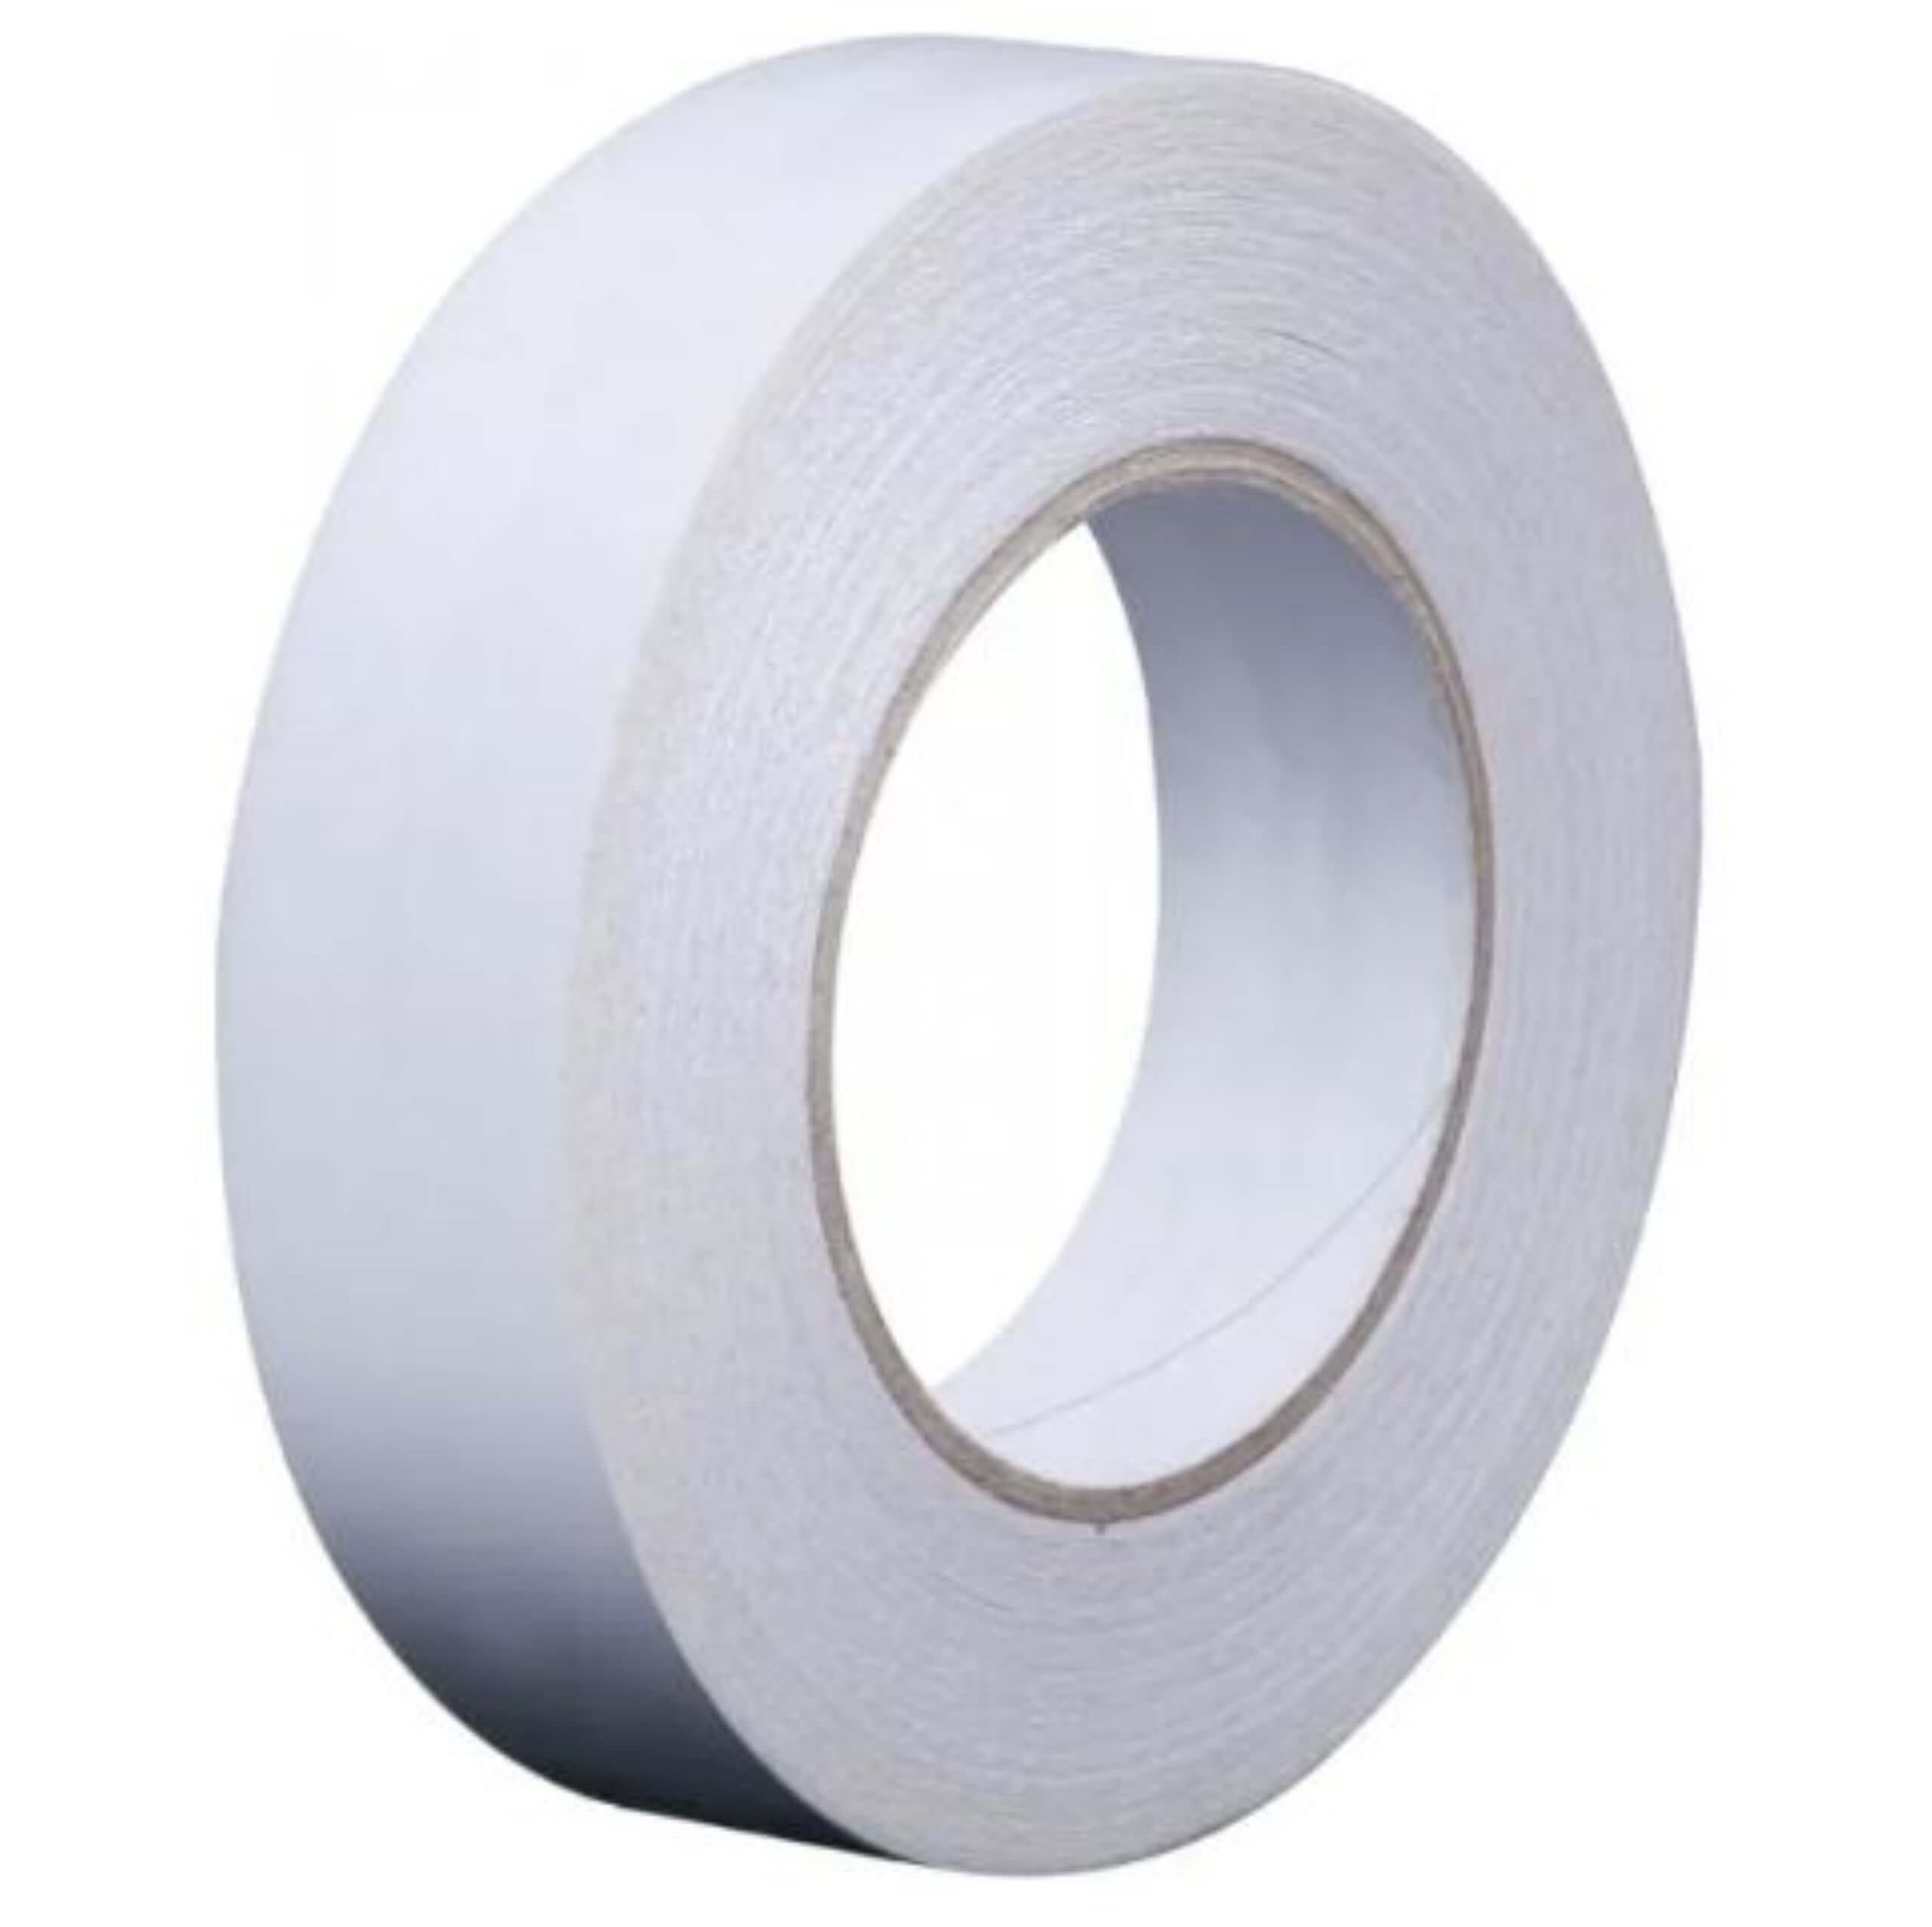 An image of tissue tape.